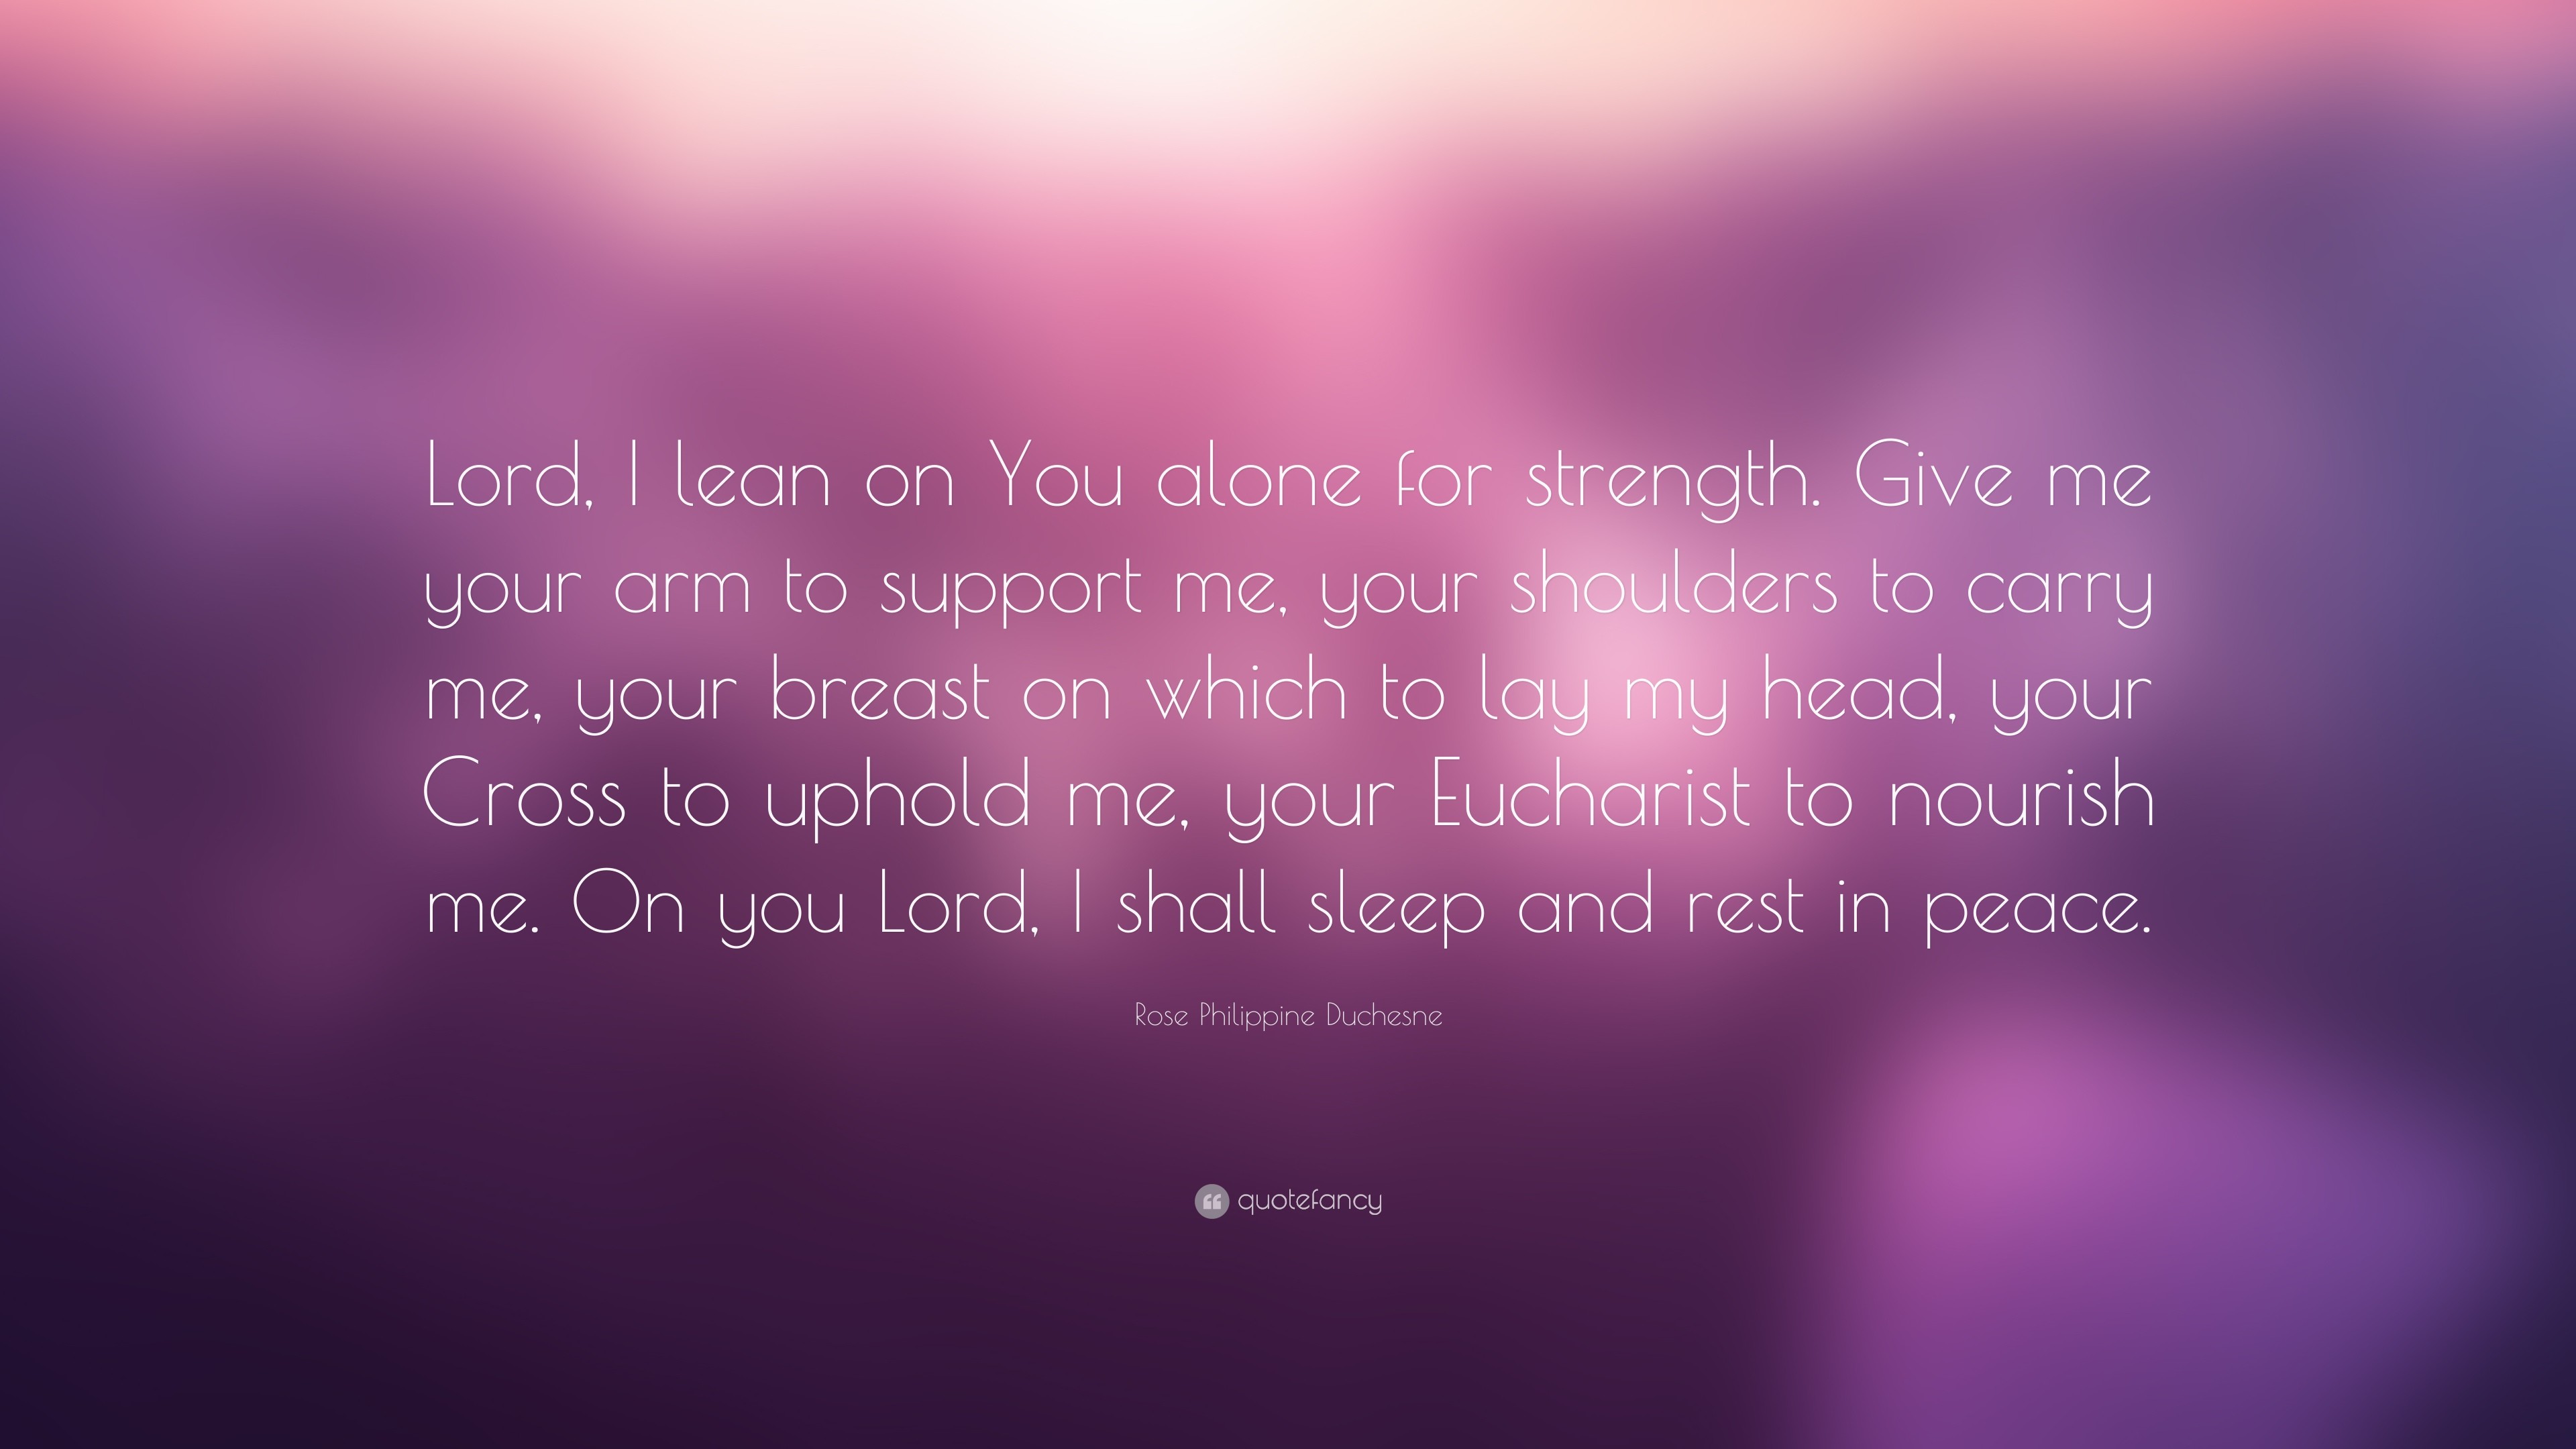 Rose Philippine Duchesne Quote: “Lord, I lean on You alone for strength.